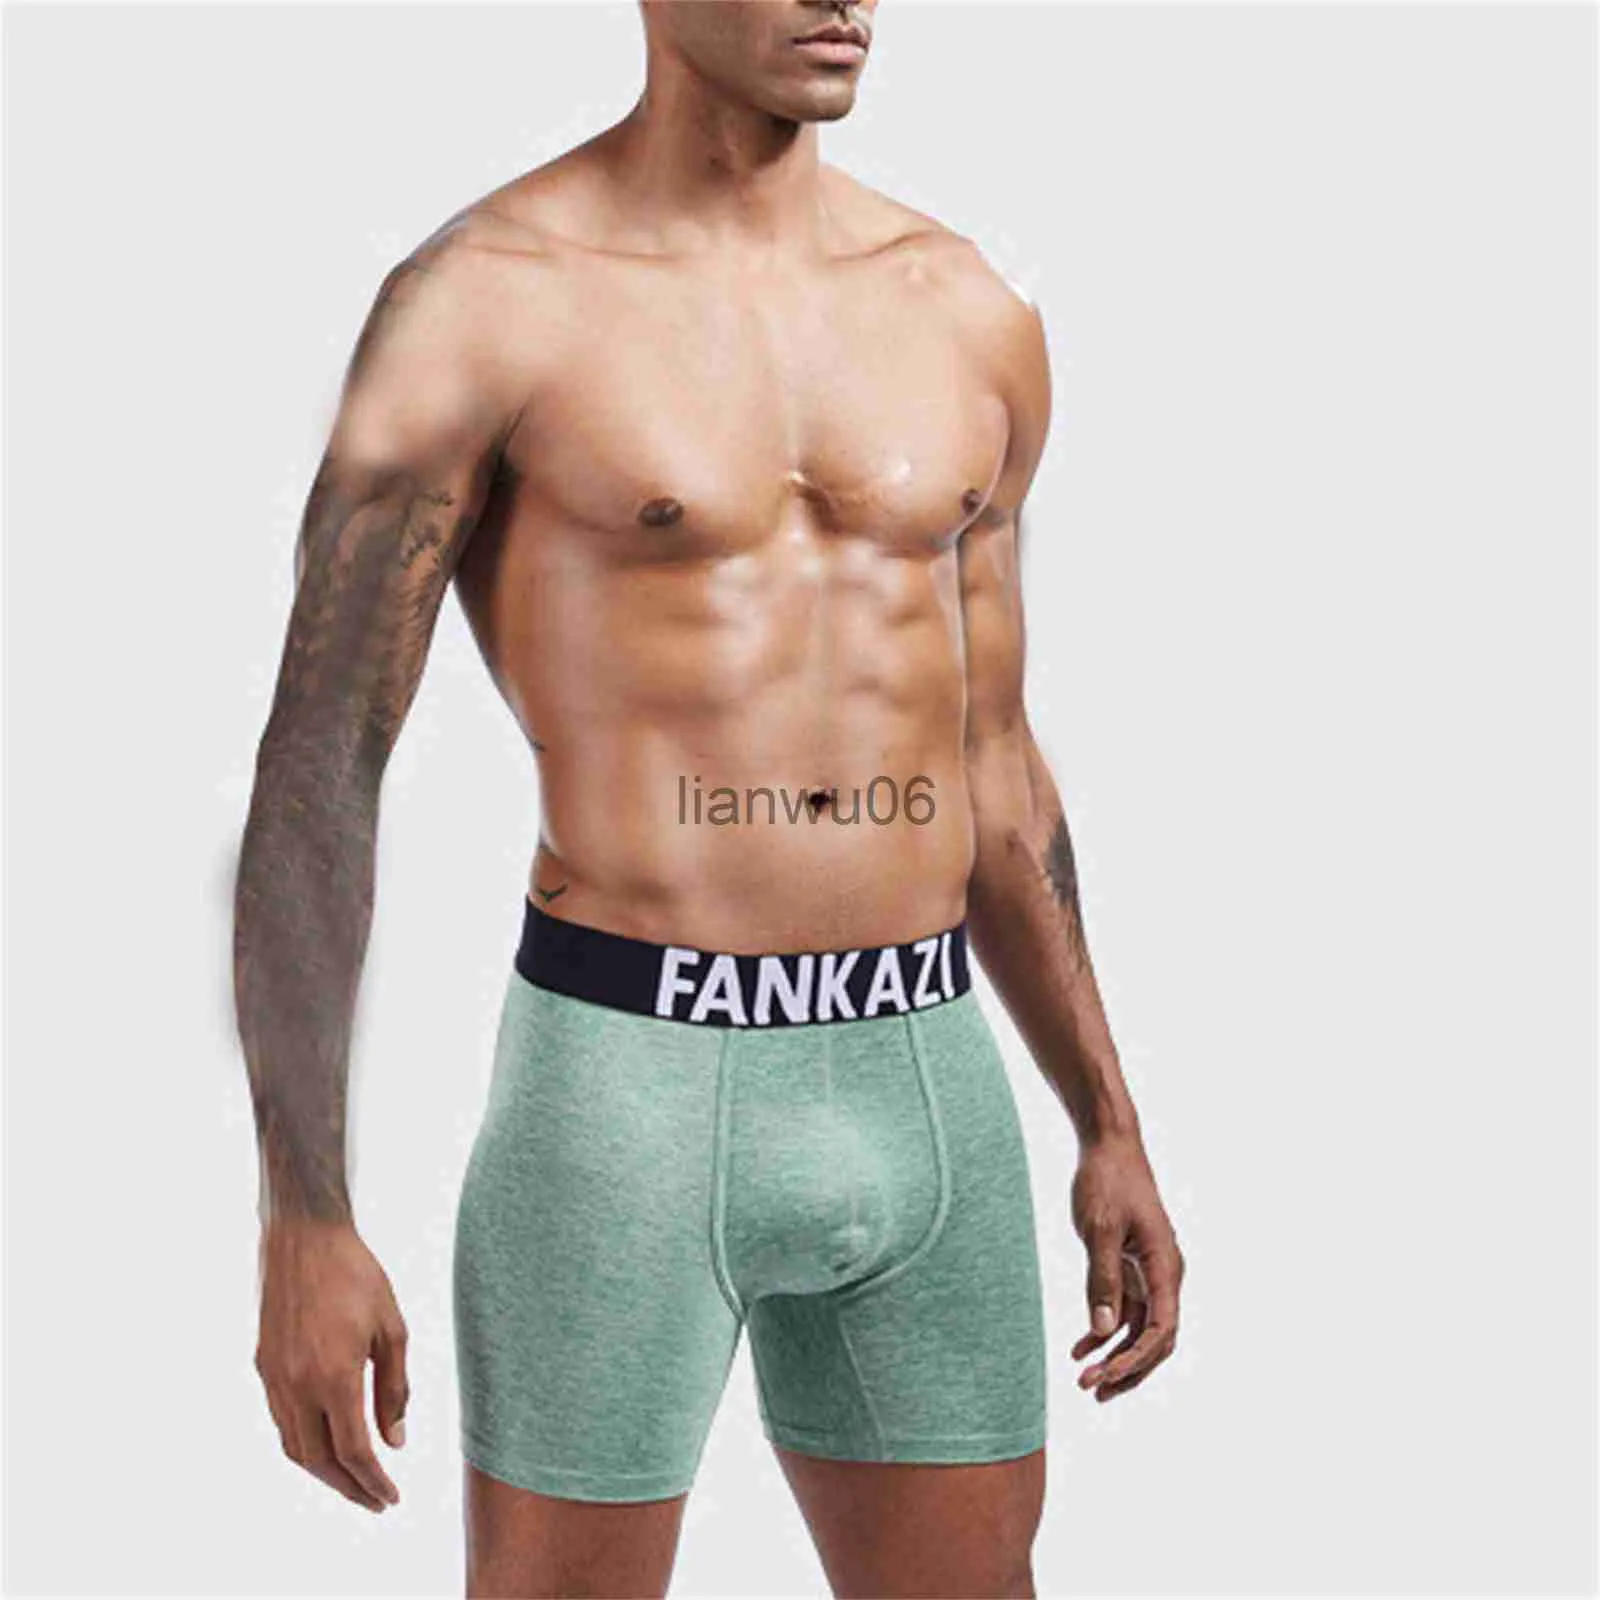 Mens Seamless Boxer Seamless Gym Shorts With Fly Pouch Breathable Long Leg  Sporting Running Underwear J230713 From Lianwu06, $3.48